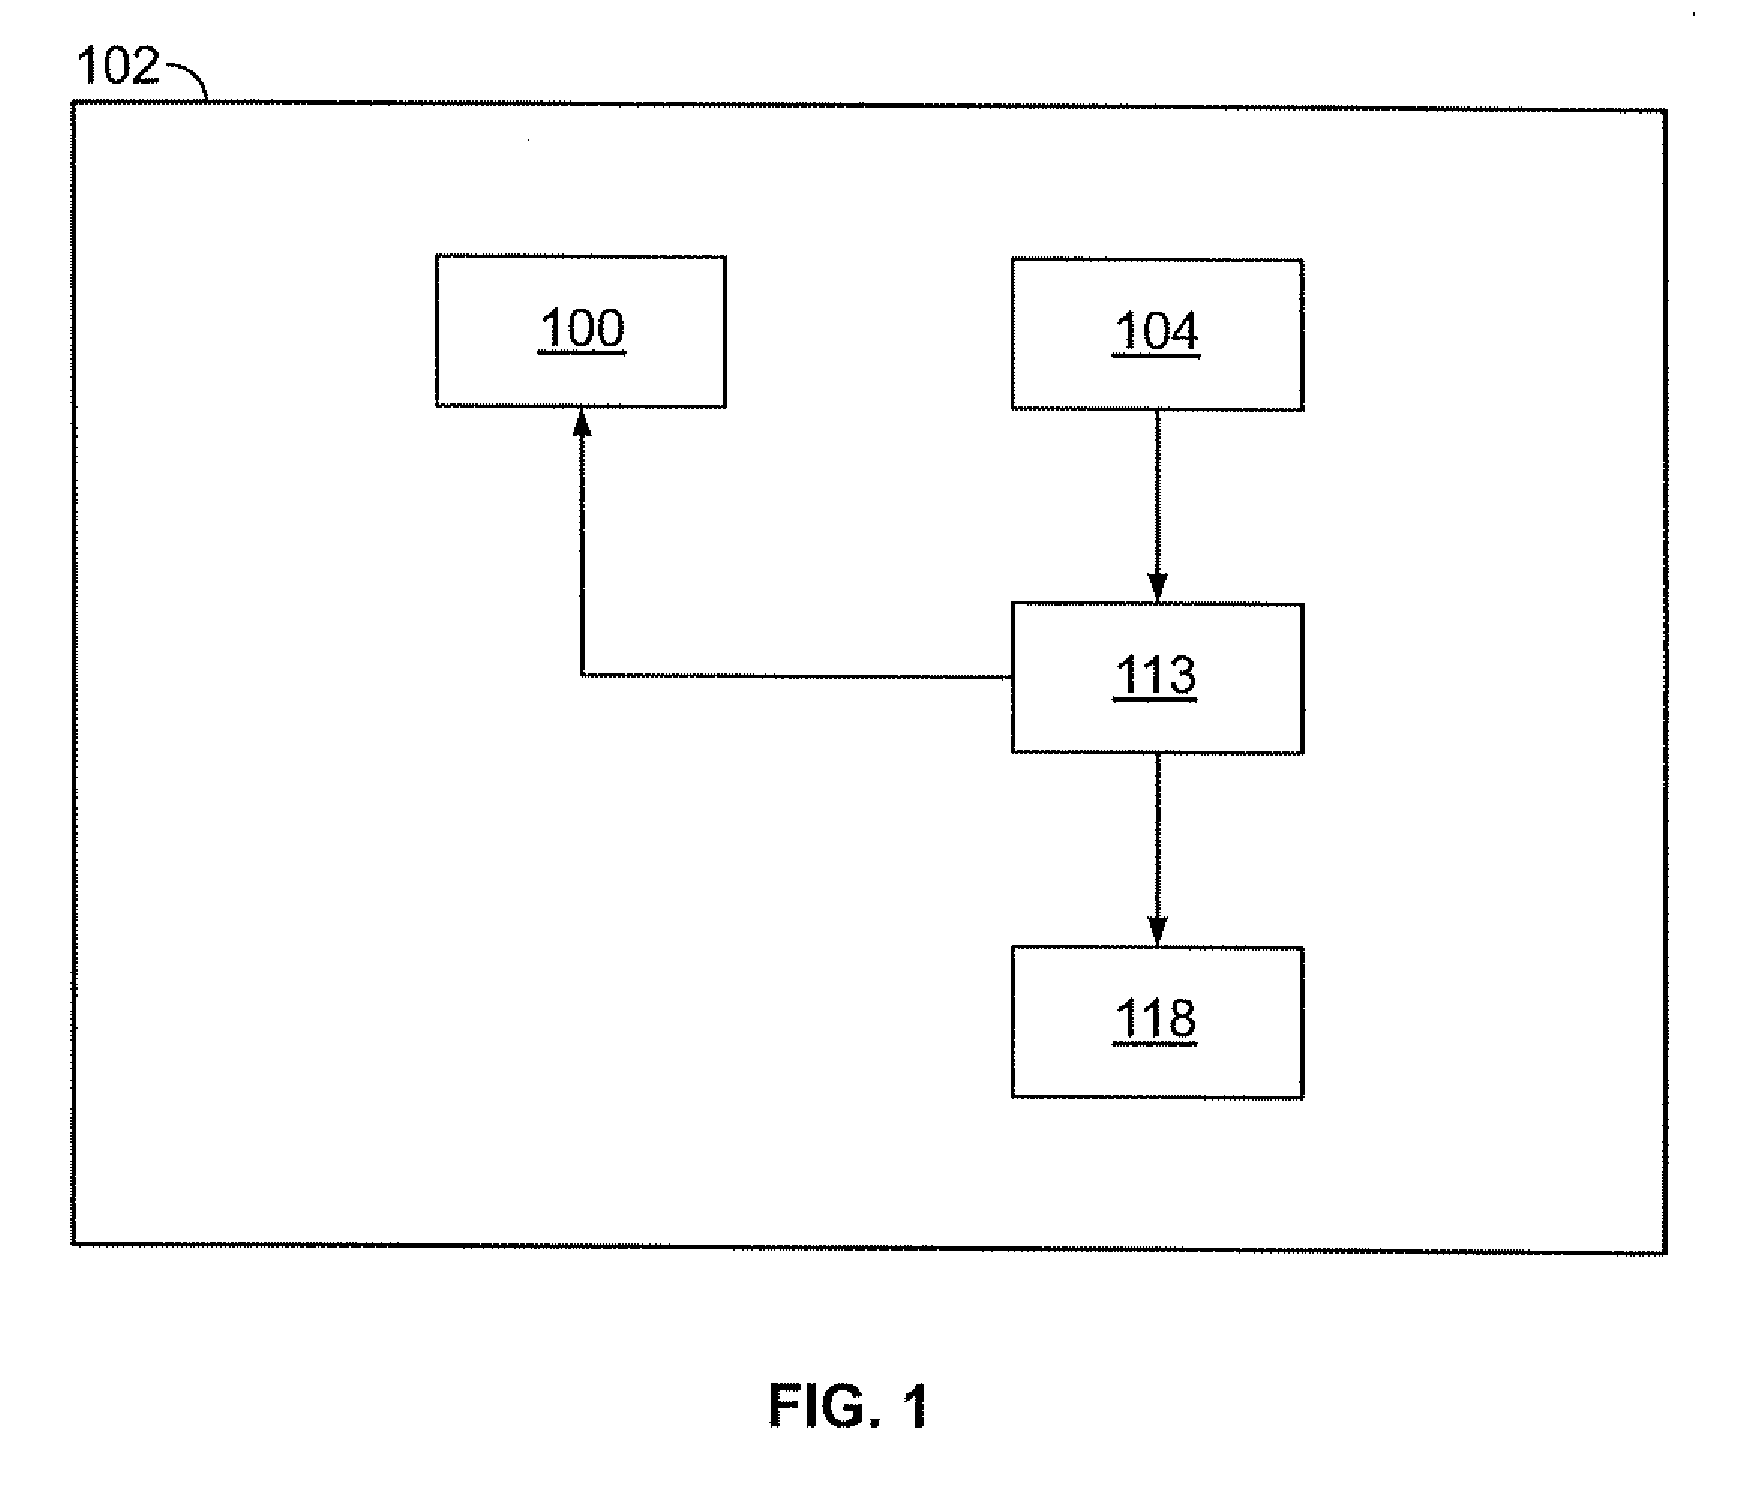 Independently-defined alteration of output from software executable using distributed alteration engine